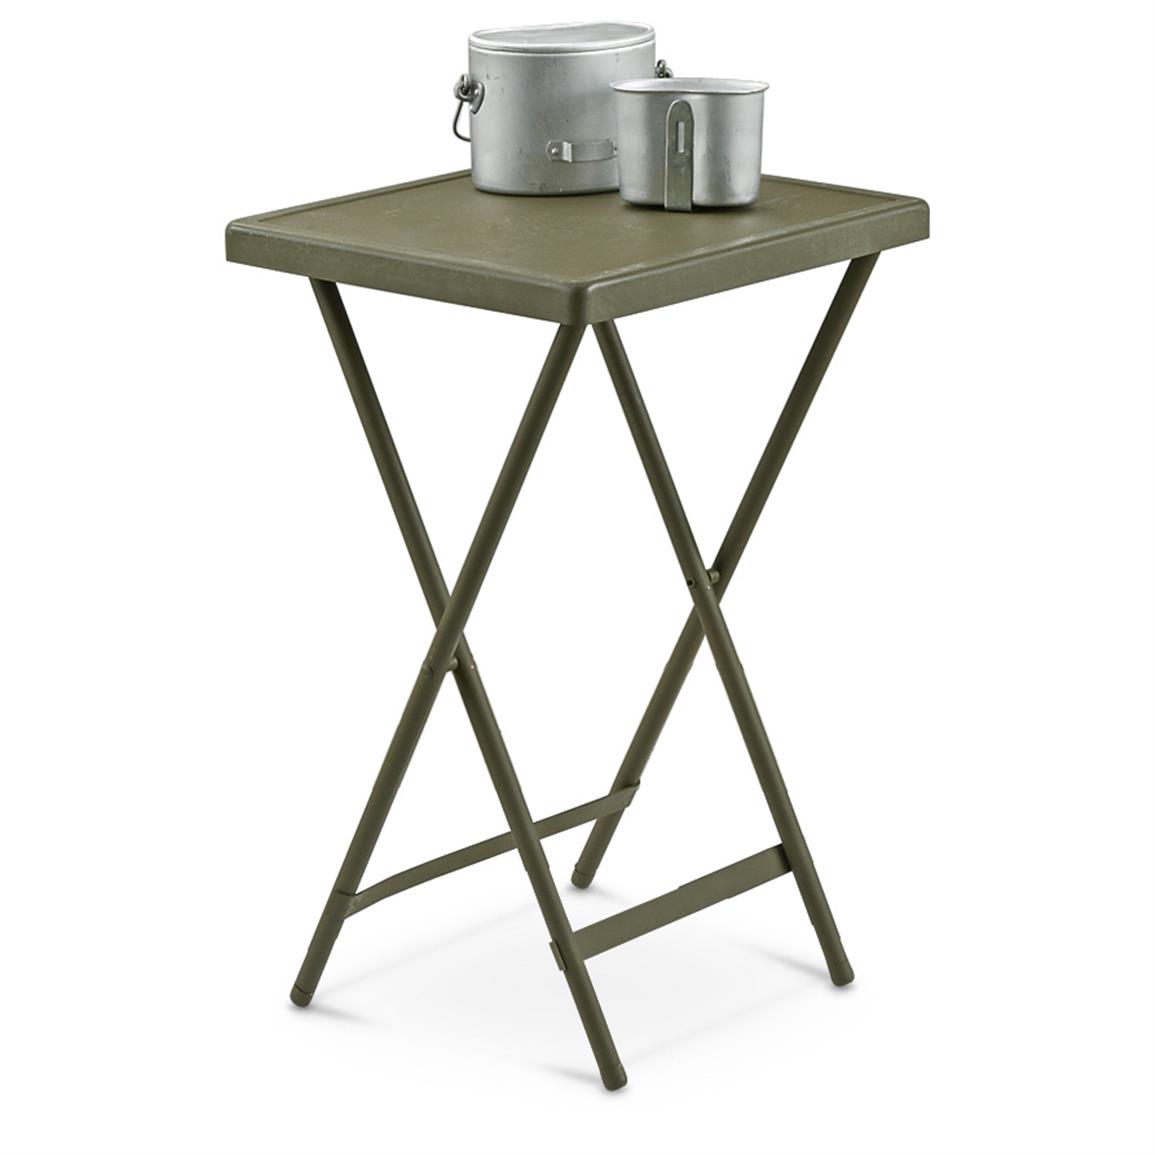 New U.S. Military Surplus Folding Table  625533, Military Field Gear at Sportsmans Guide